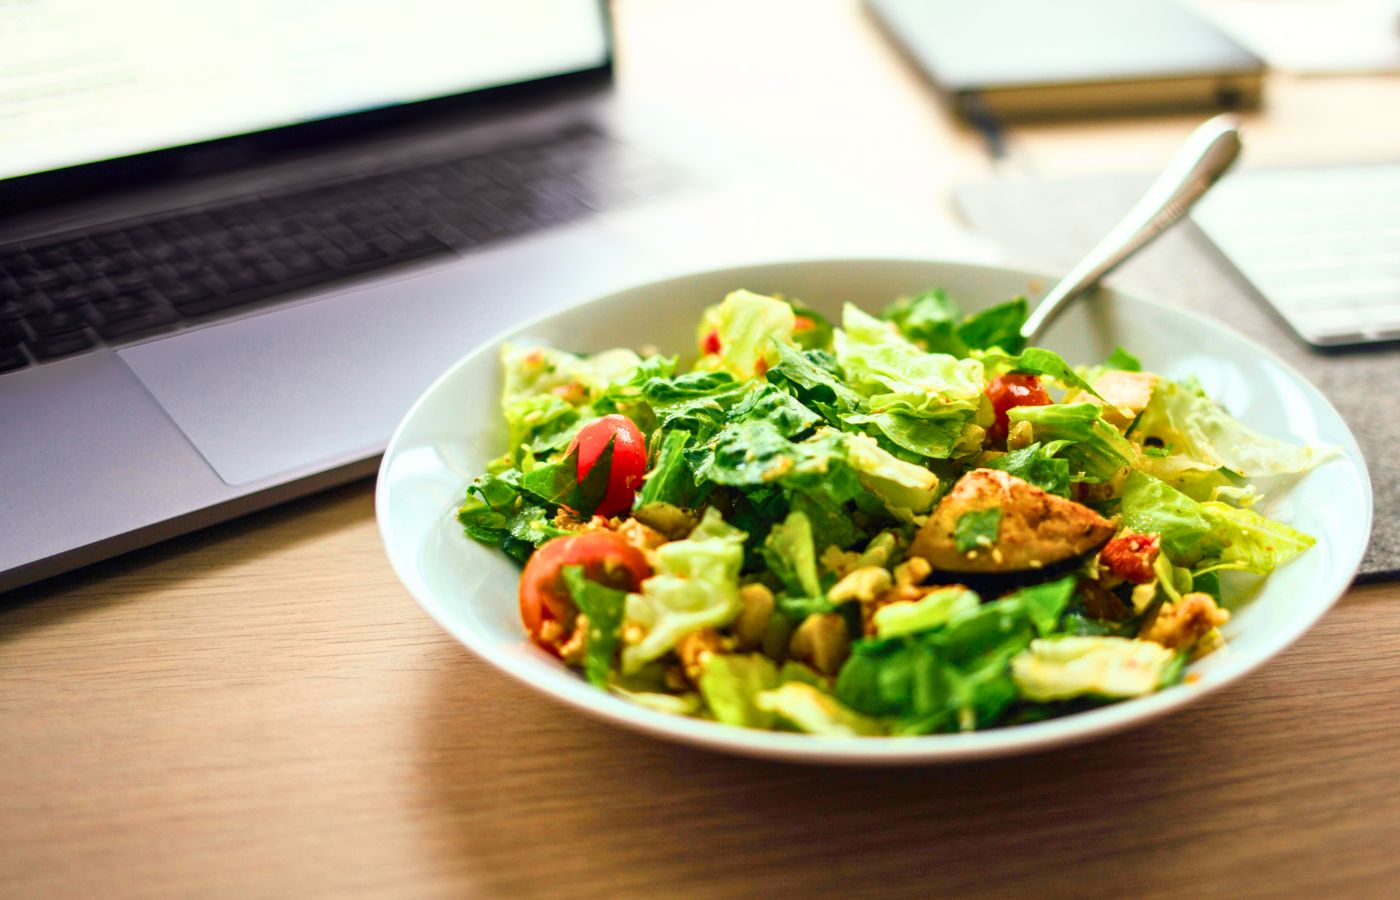 An example of one of the gluten free lunch ideas for work, a salad with fresh and roasted vegetables on a desk in front of a laptop.